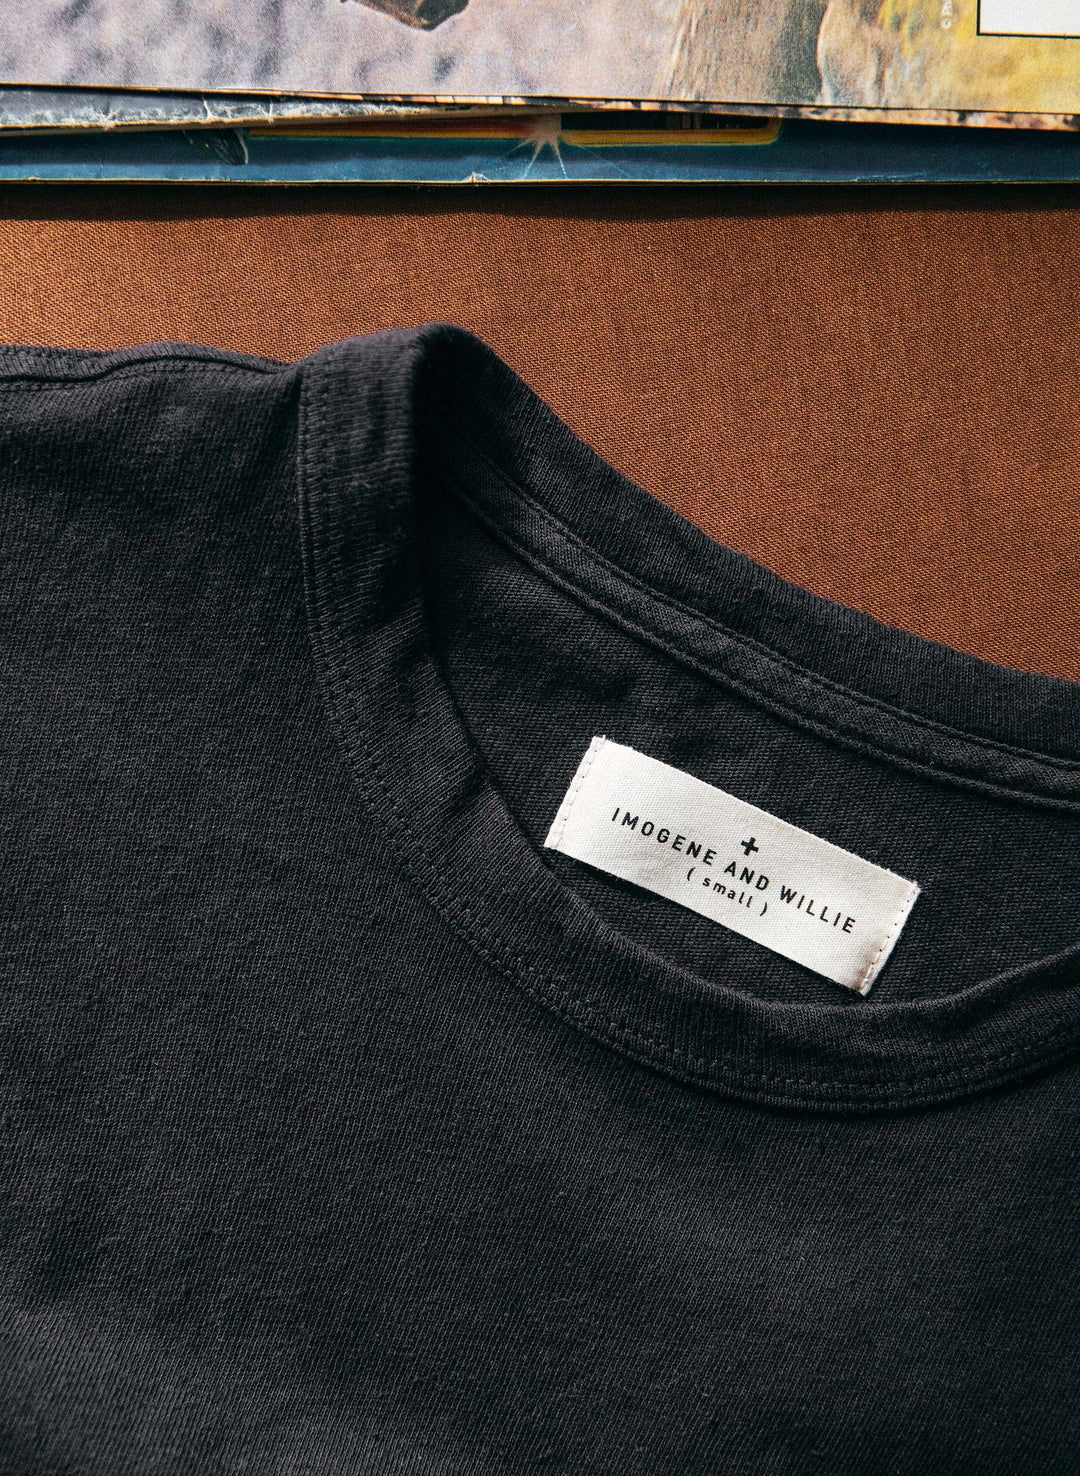 a black shirt with a white label